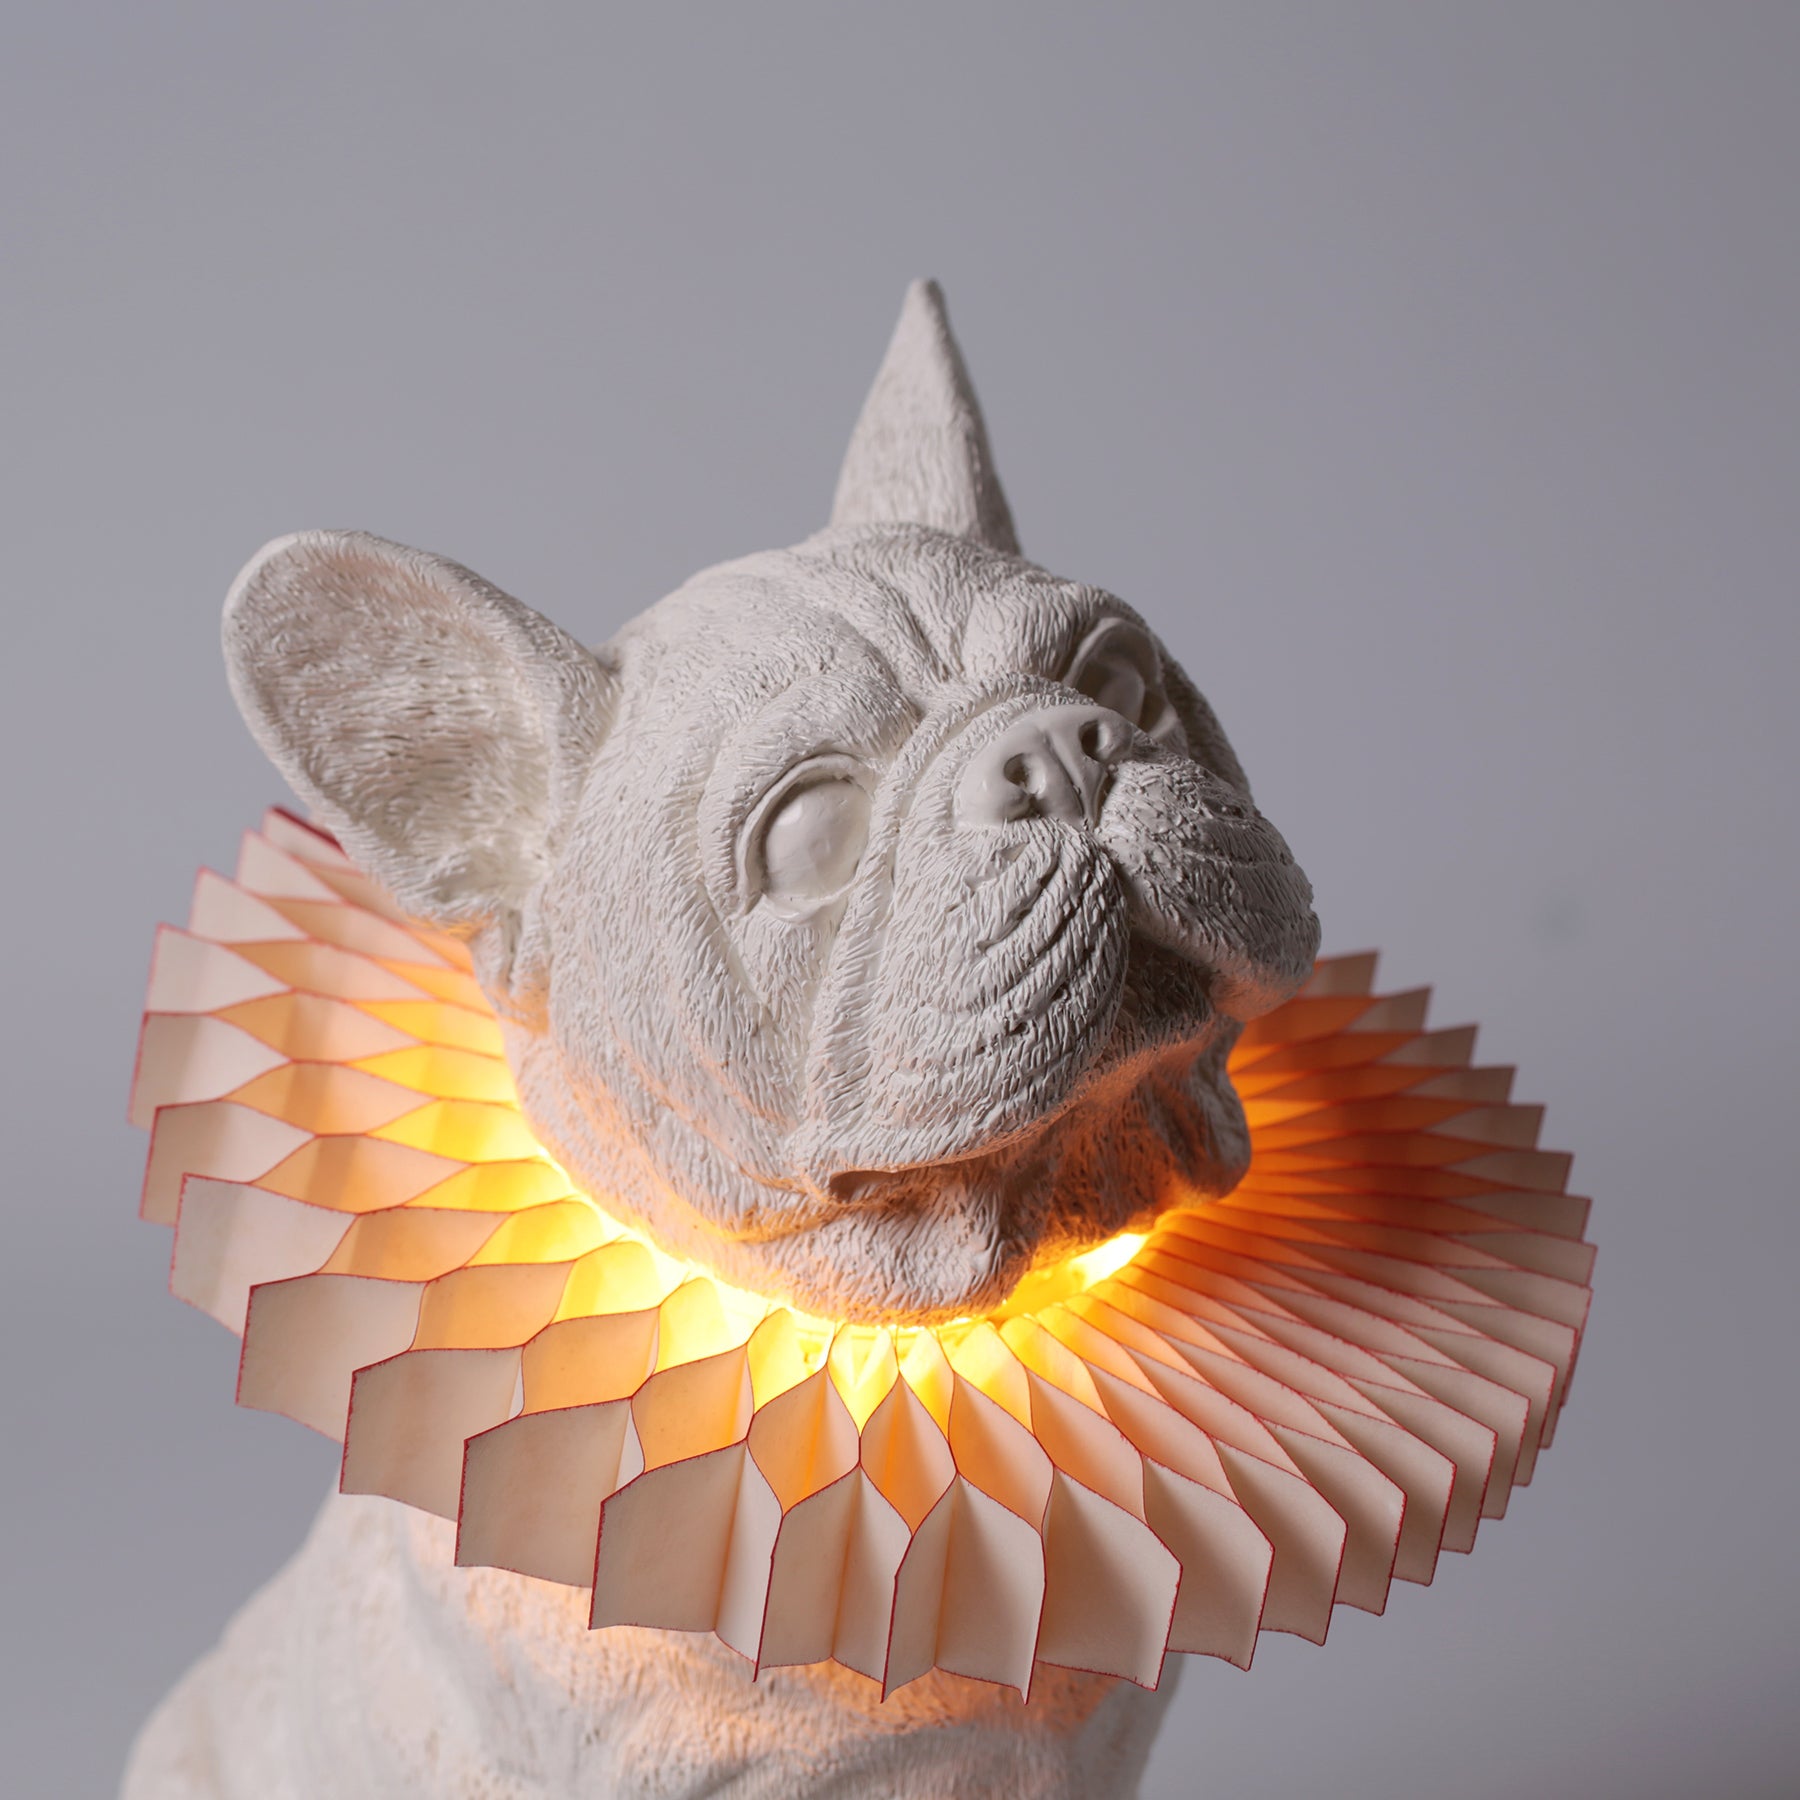 Now, Christmas decorations is unique with bulldog lamp & sculpture!